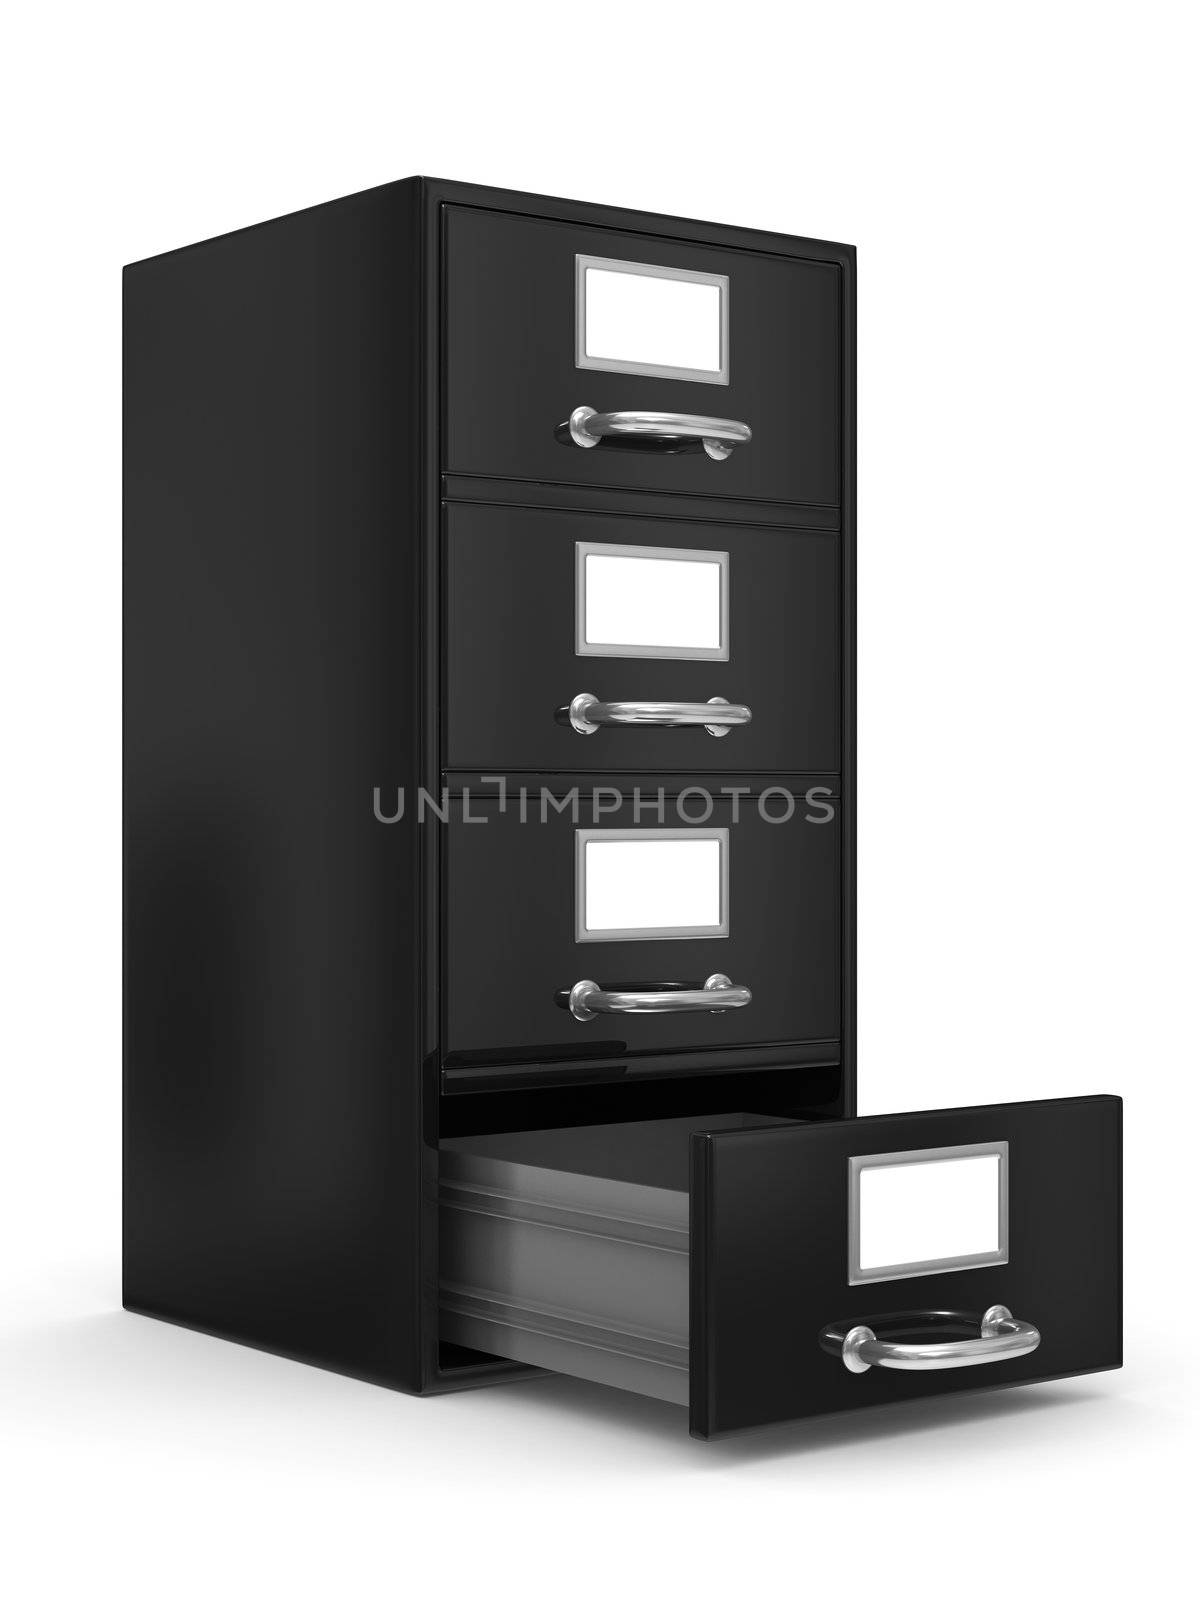 Filing cabinet on white. Isolated 3D image